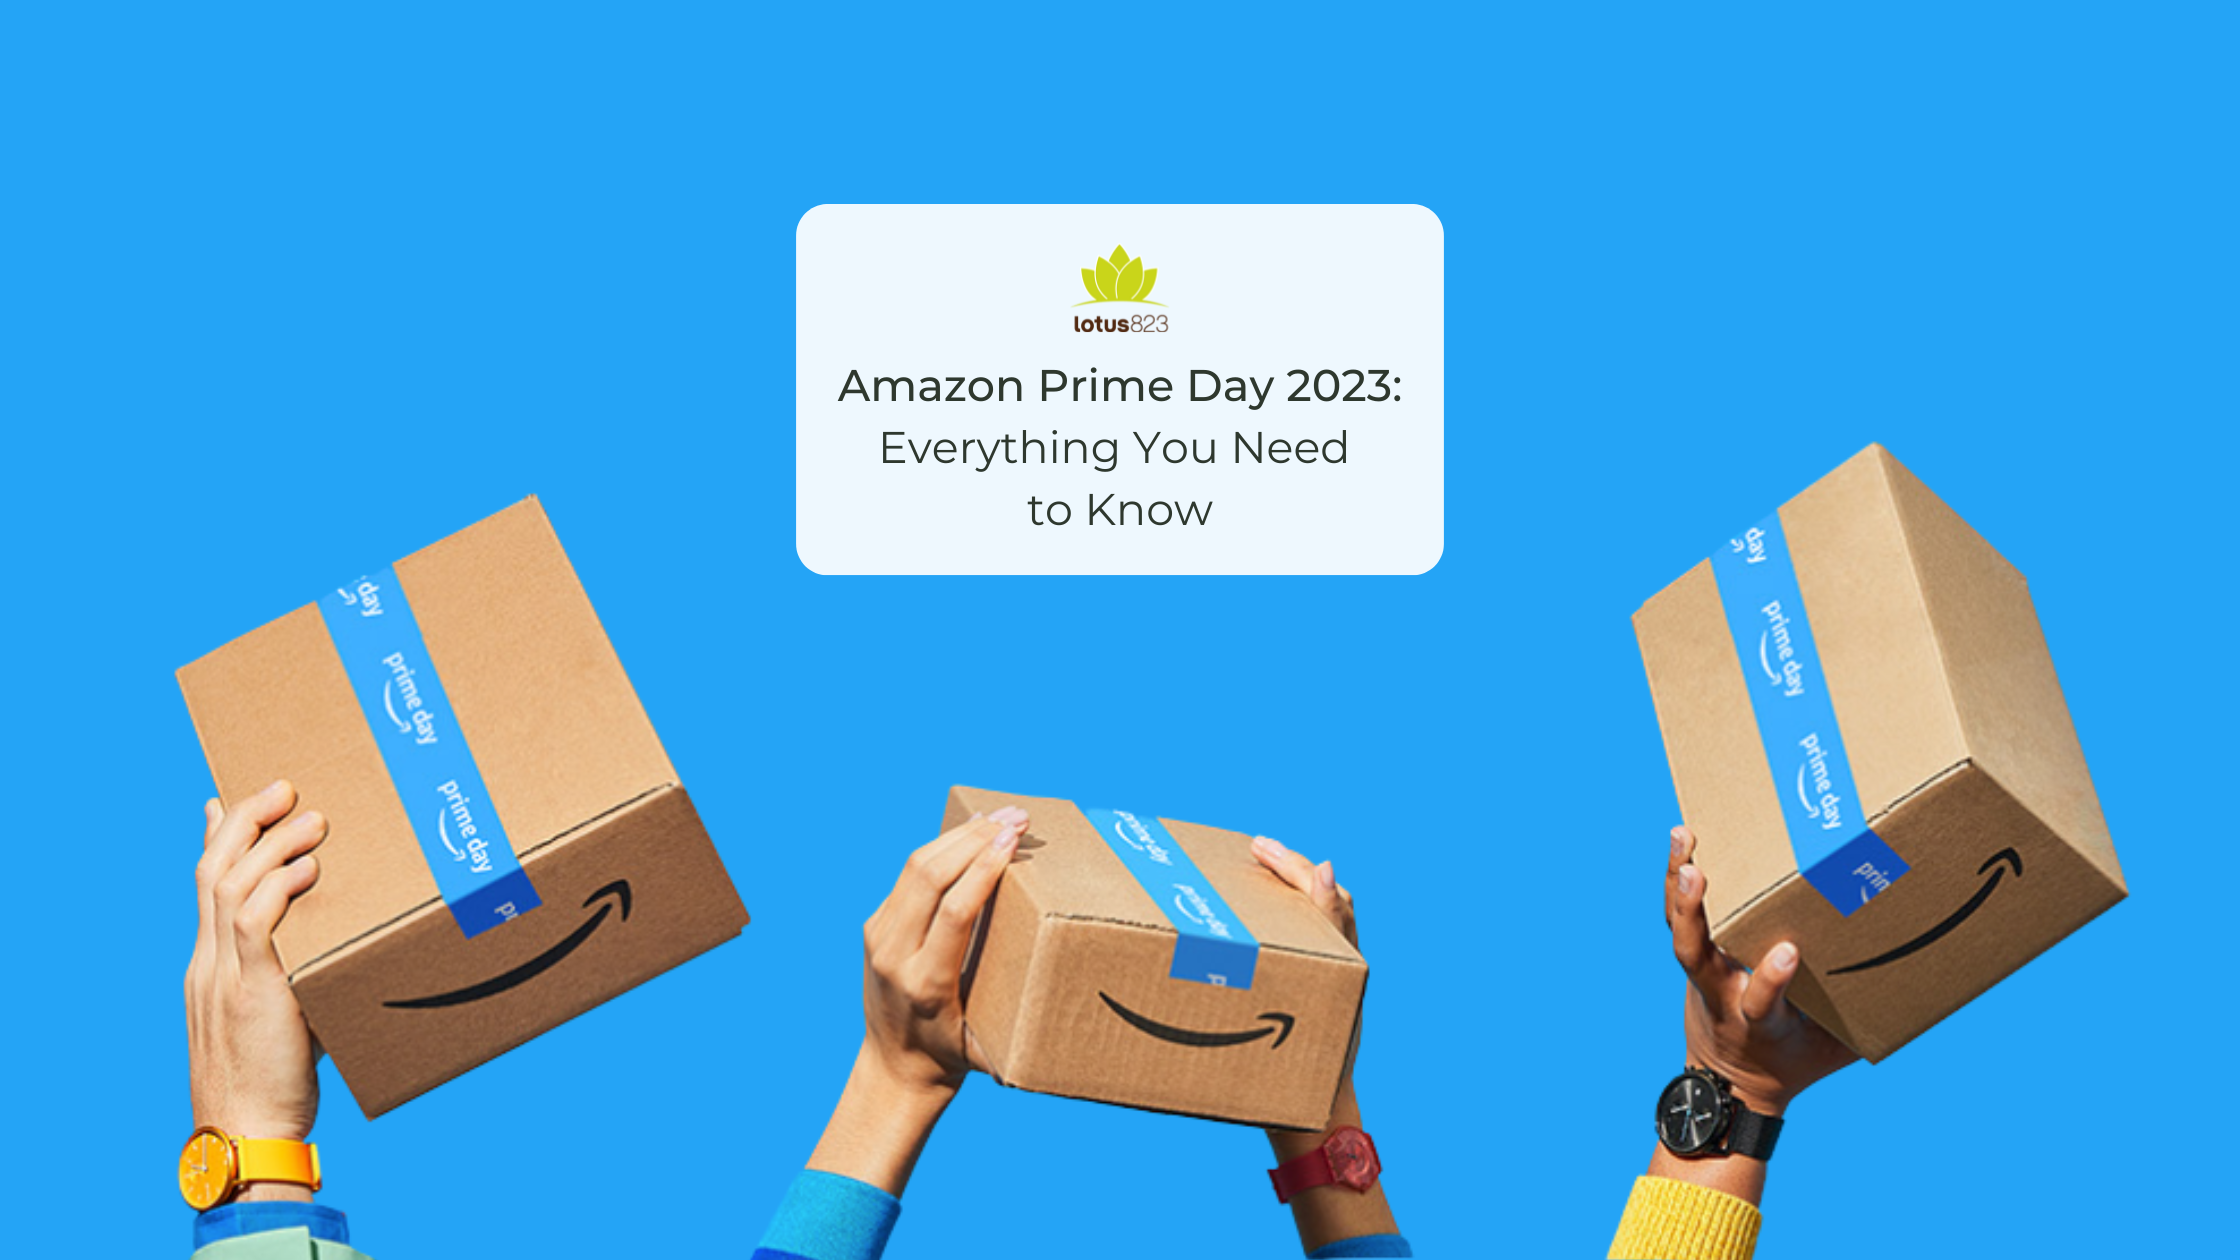 Amazon Prime Day 2023 Everything You Need to Know